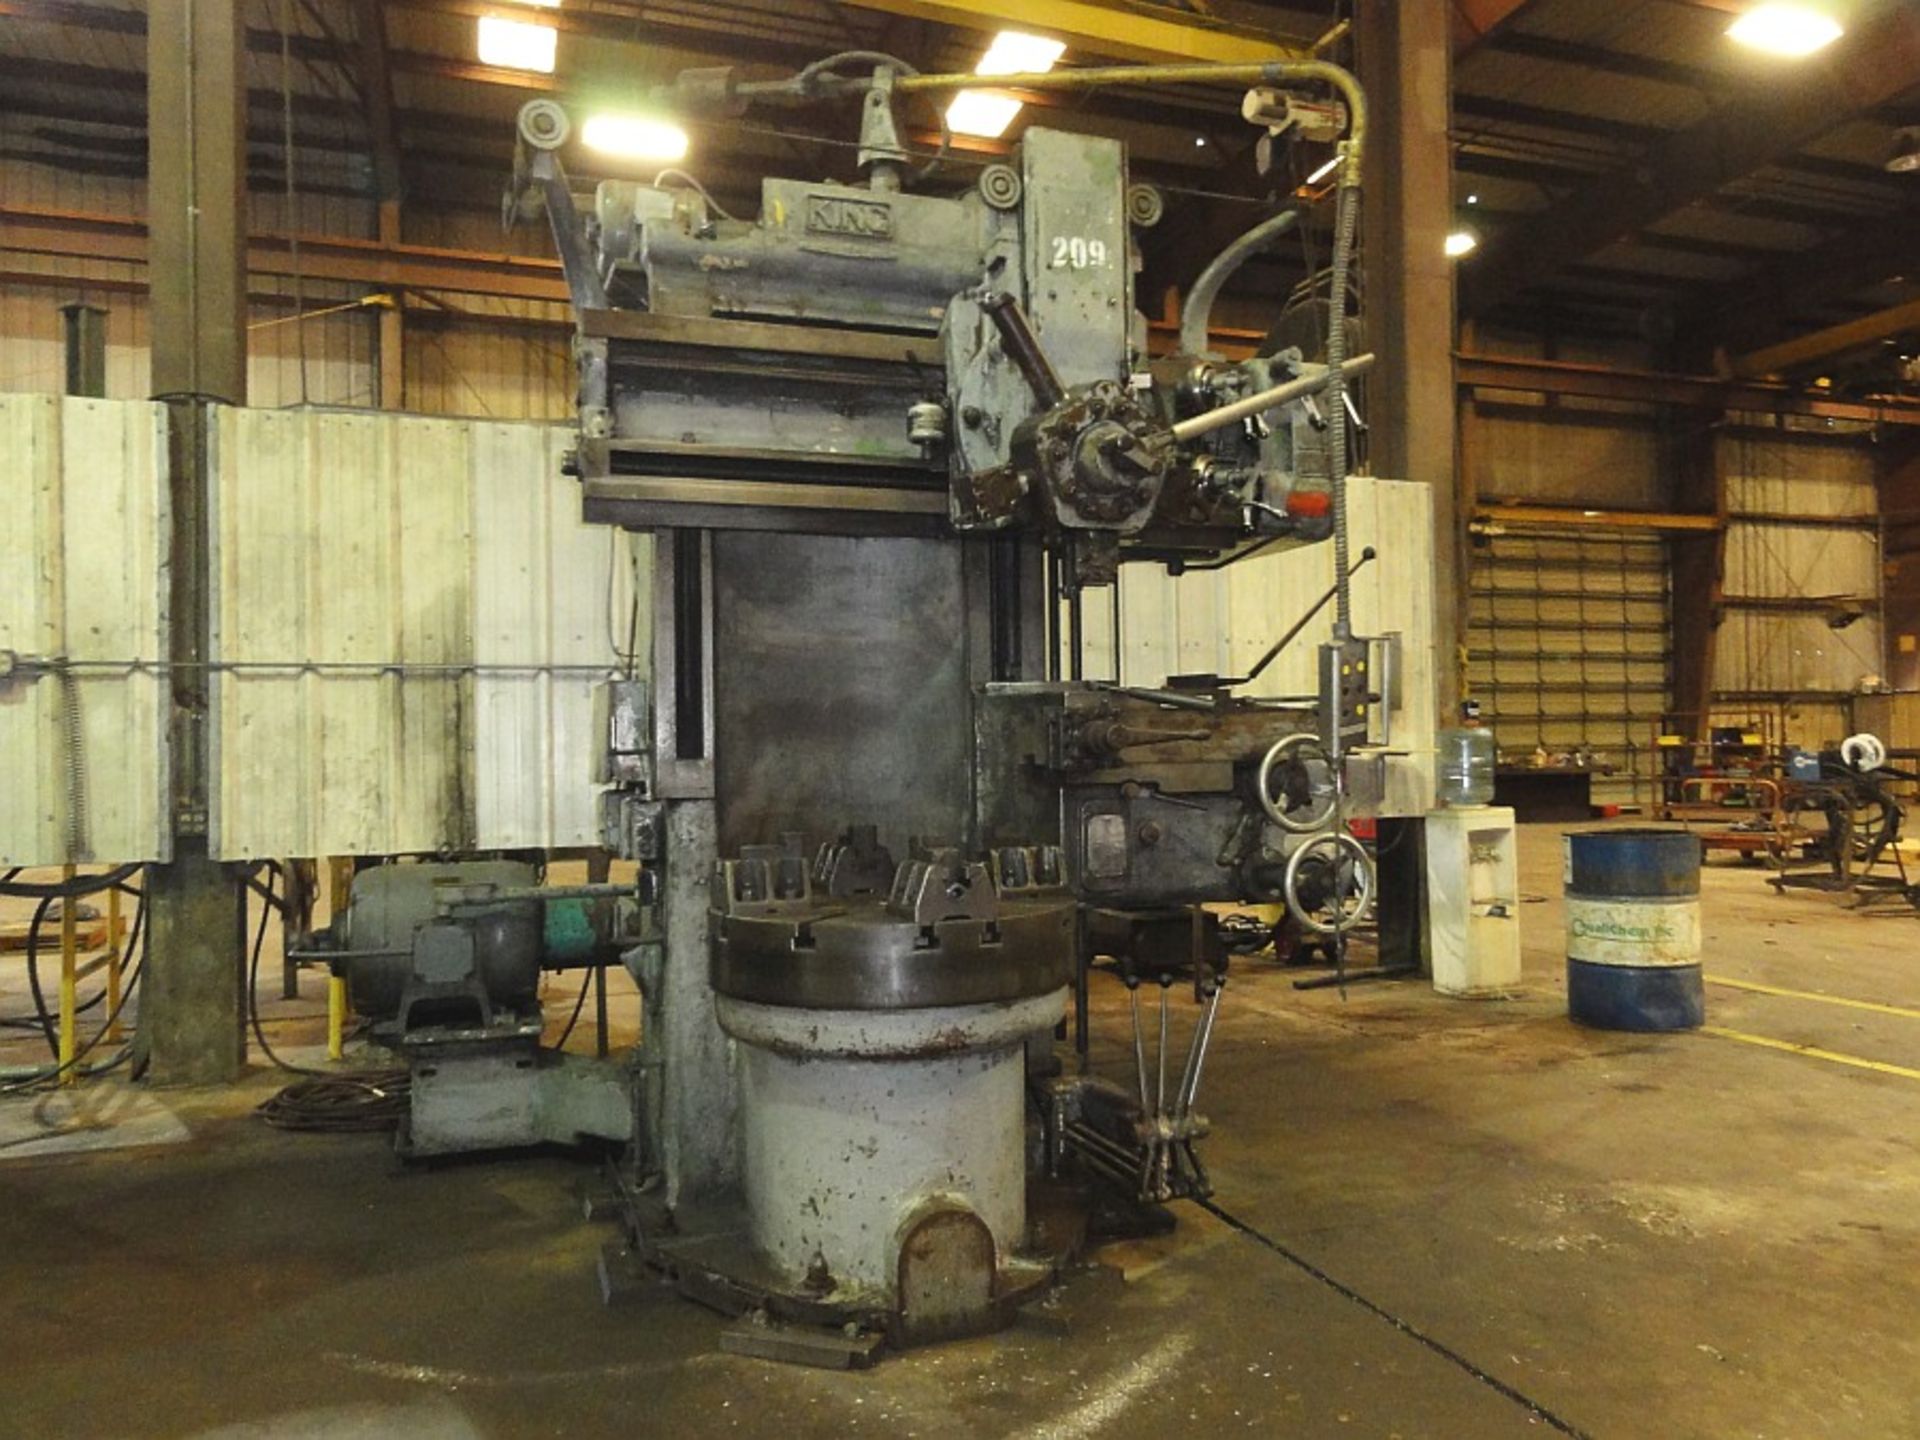 King 36" Vertical Turret Lathe, 36" 4-jaw Table,